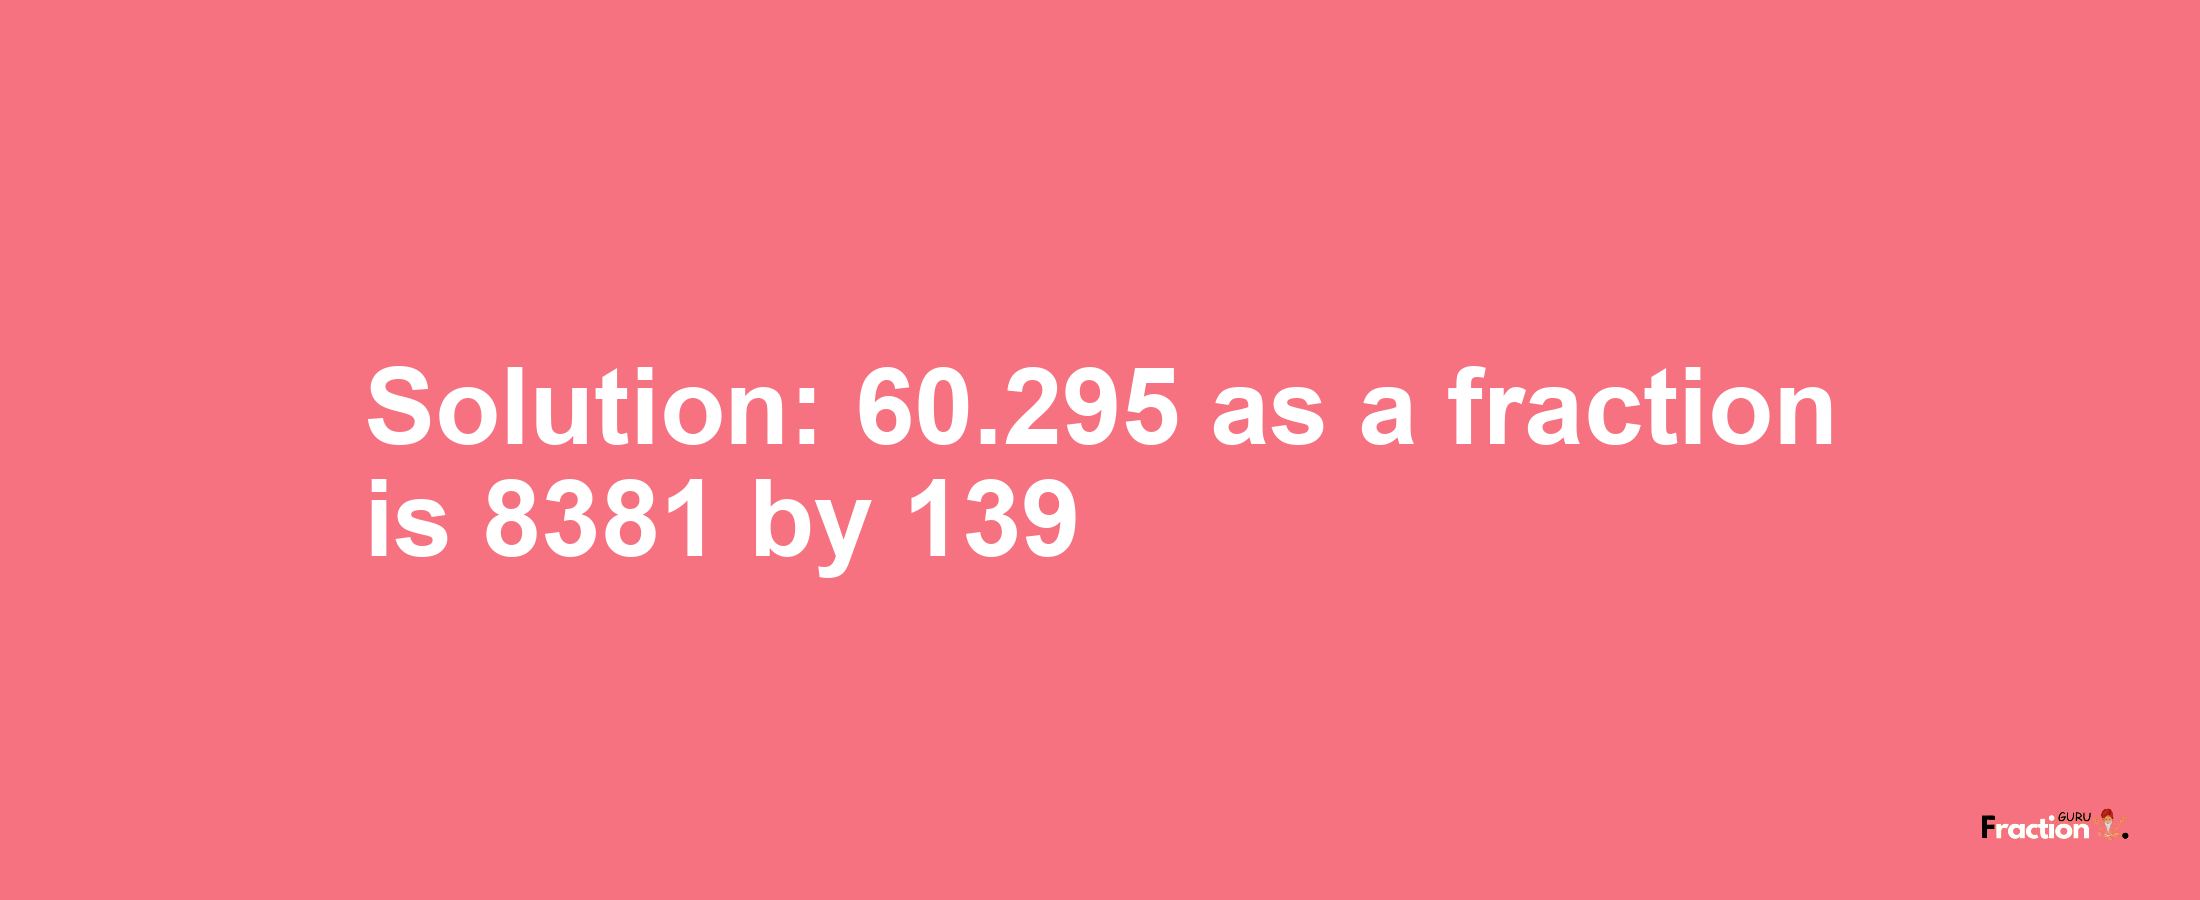 Solution:60.295 as a fraction is 8381/139